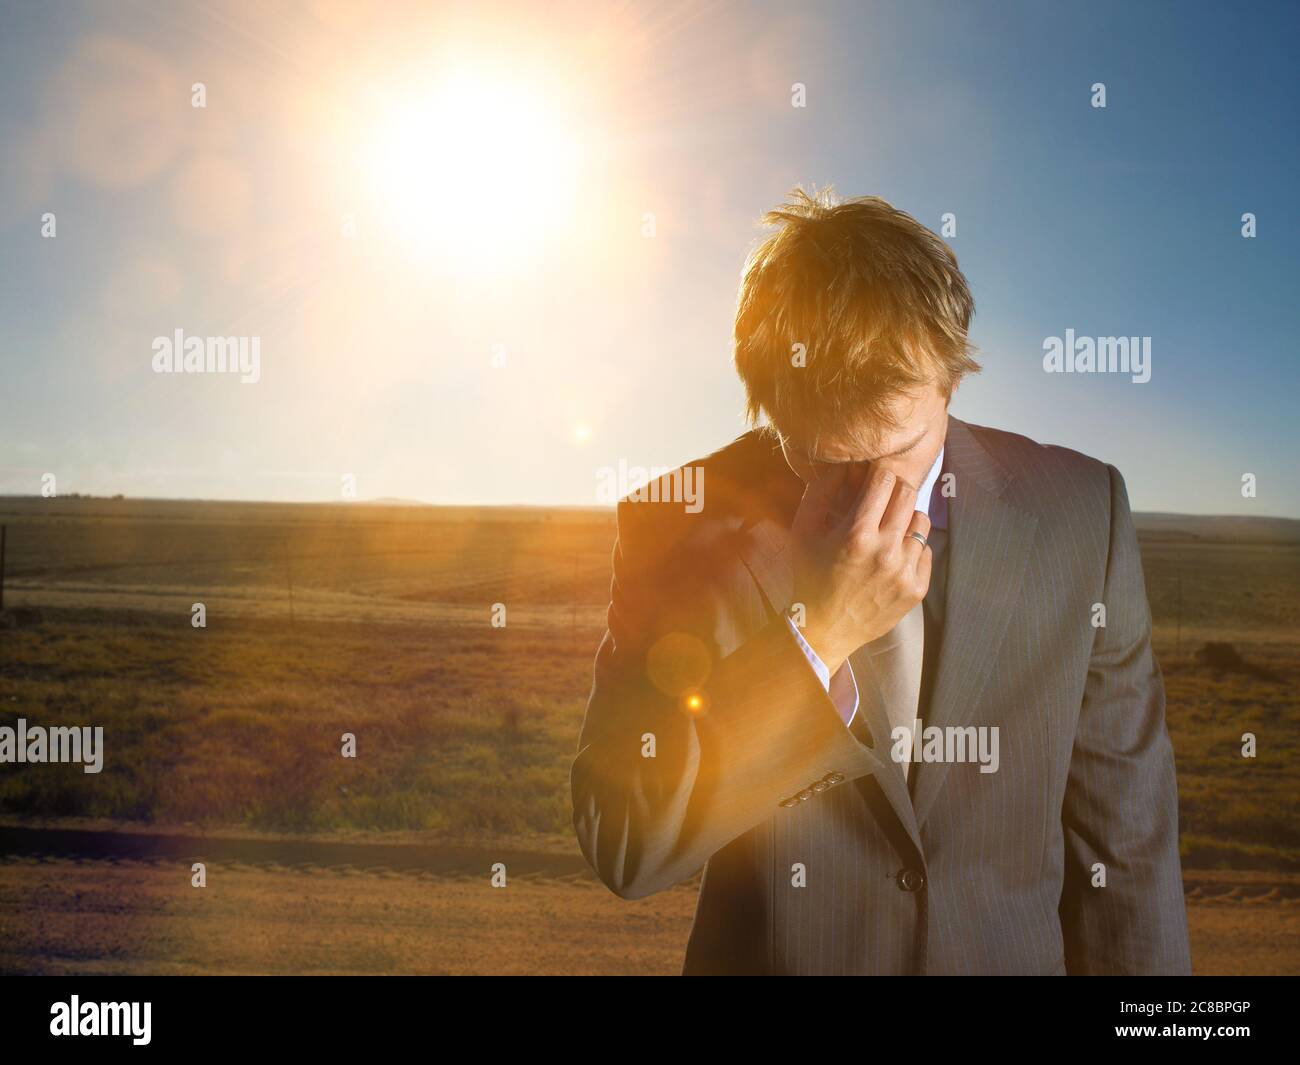 Businessman in suit lost in the desert Stock Photo